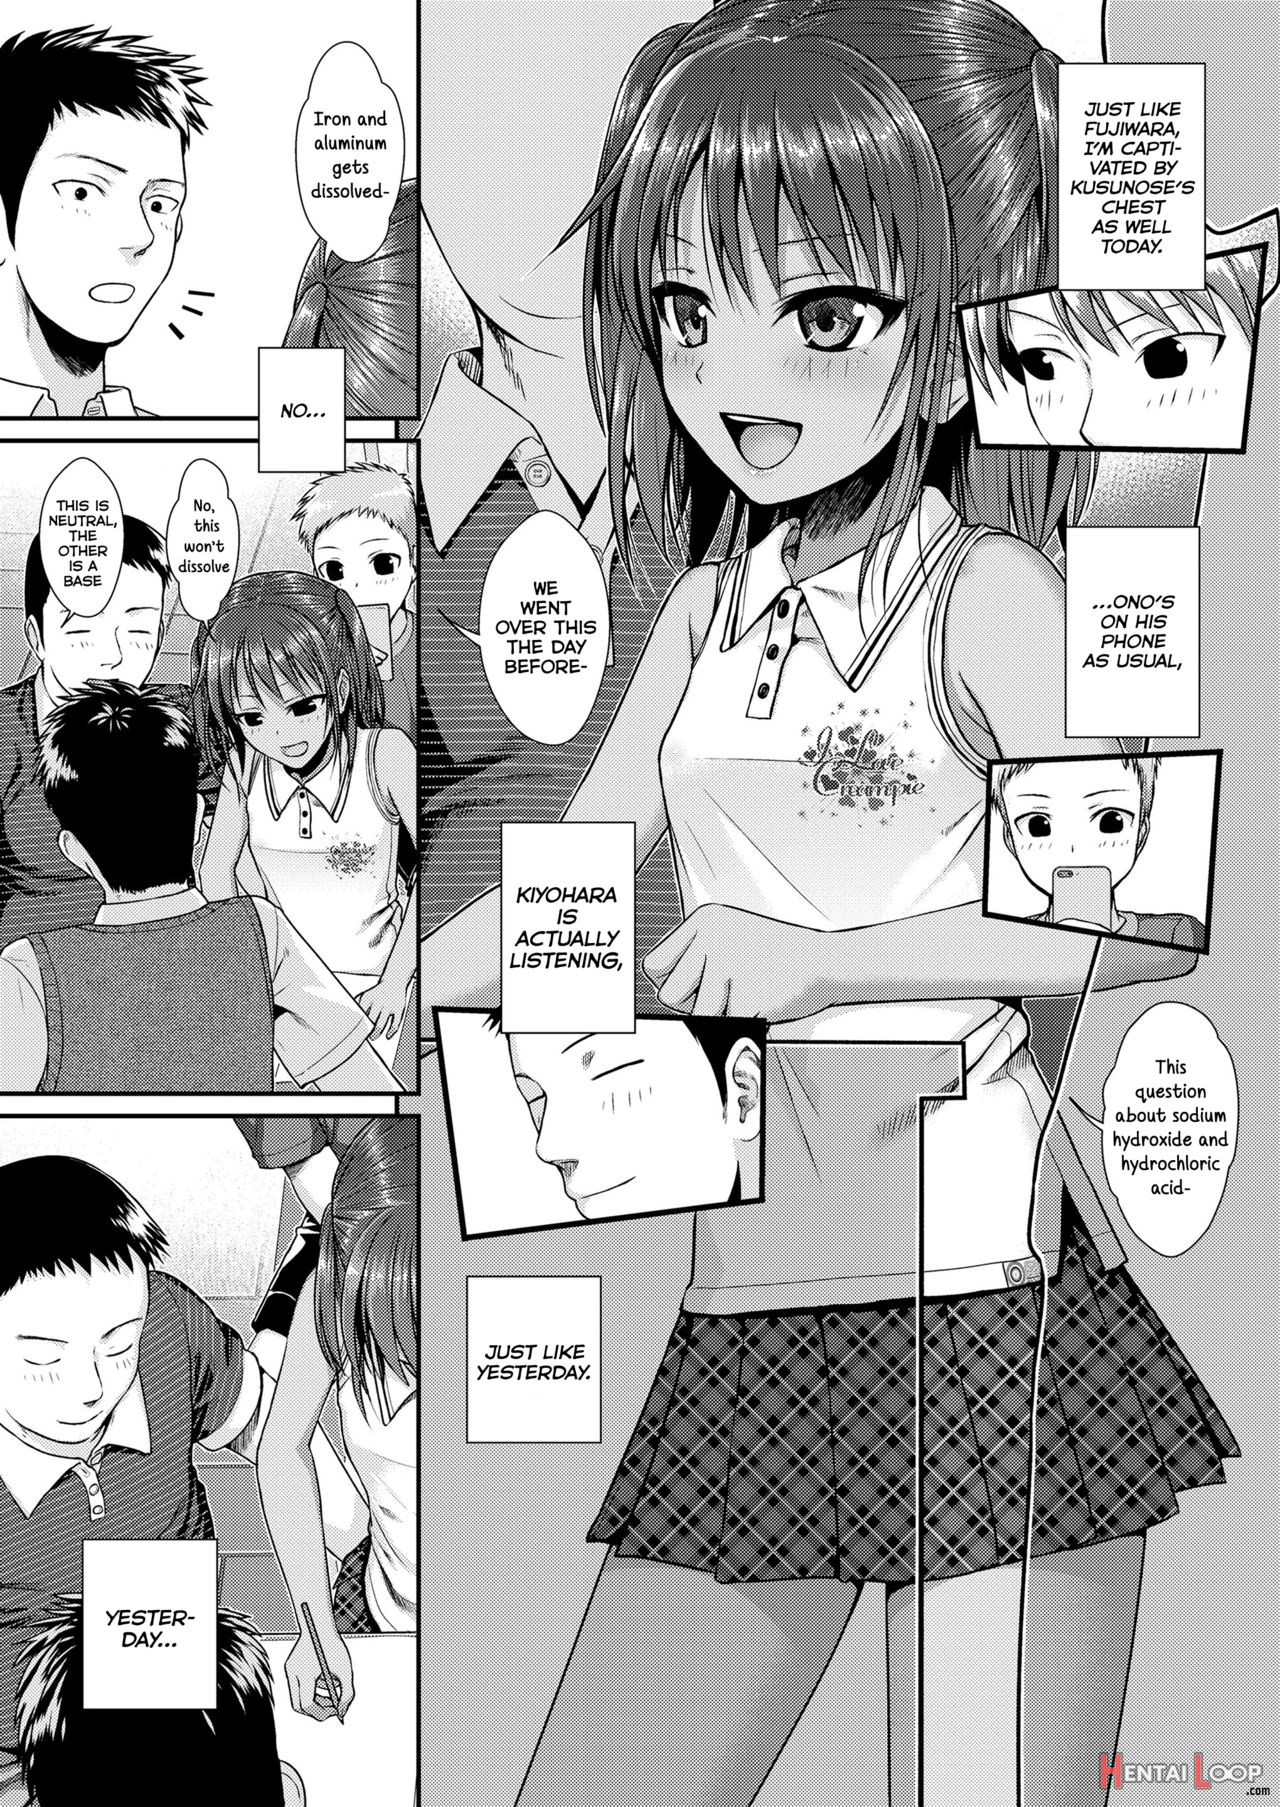 Together With Everyone After School page 9